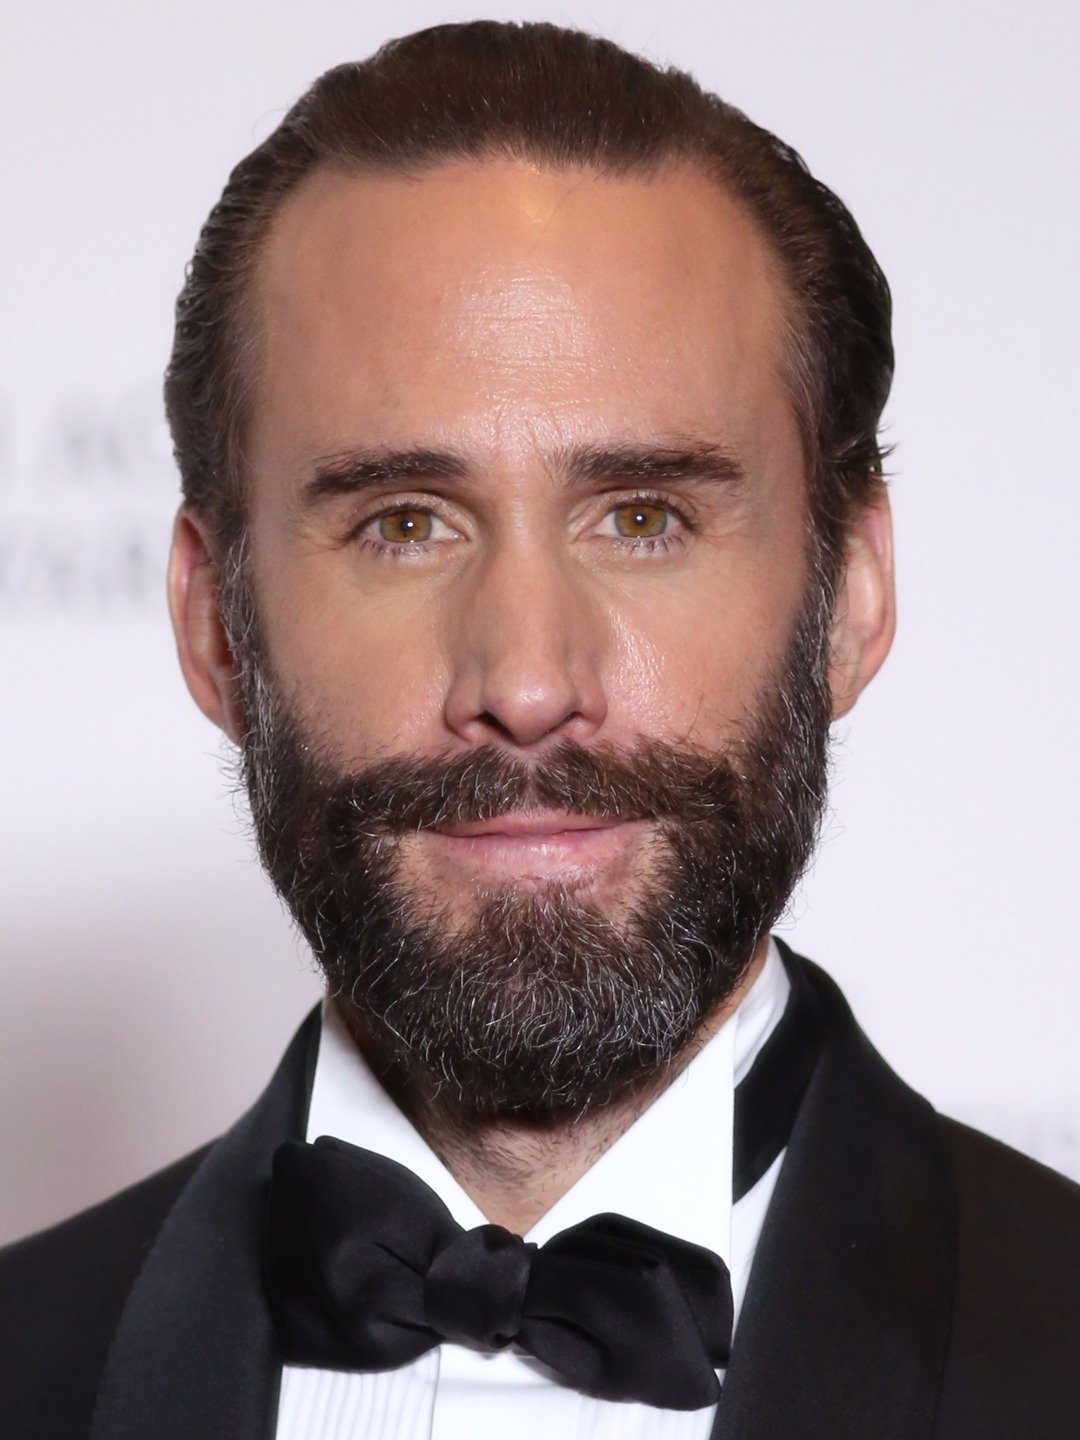 How tall is Joseph Fiennes?